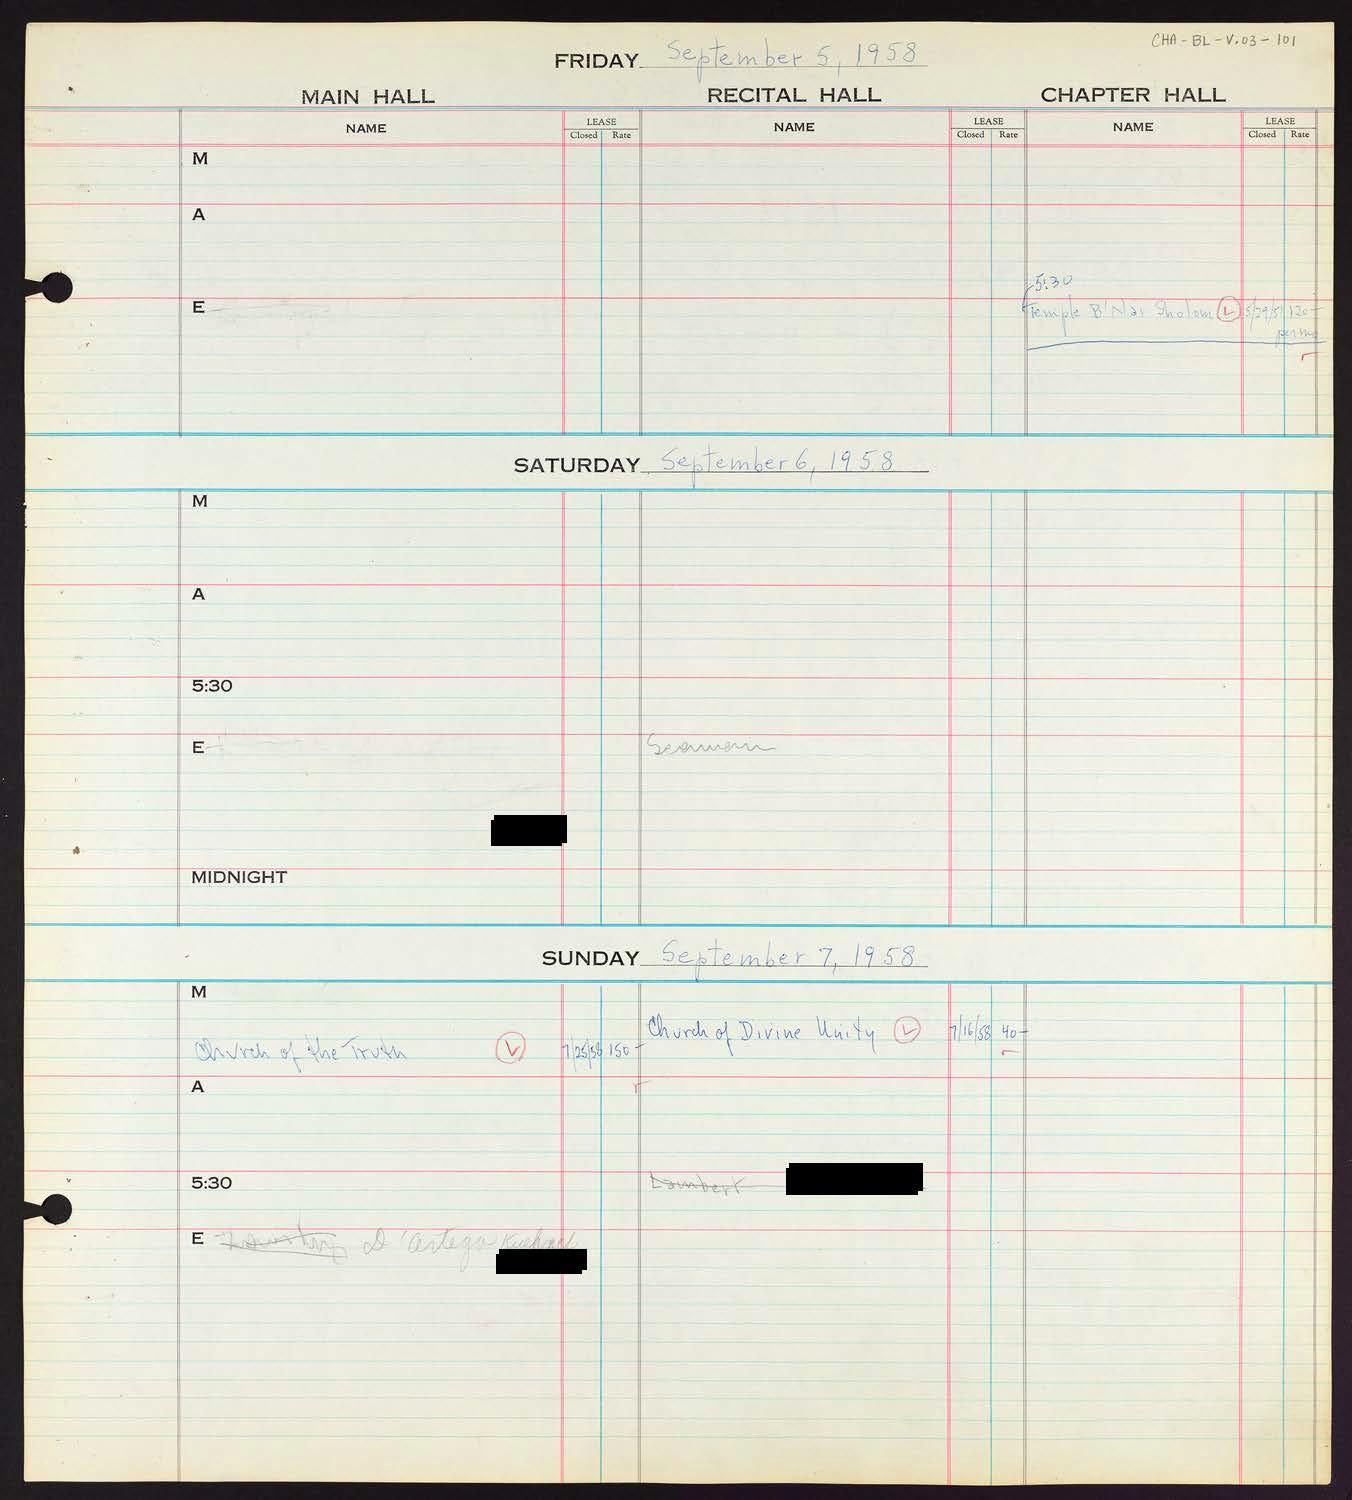 Carnegie Hall Booking Ledger, volume 3, page 101